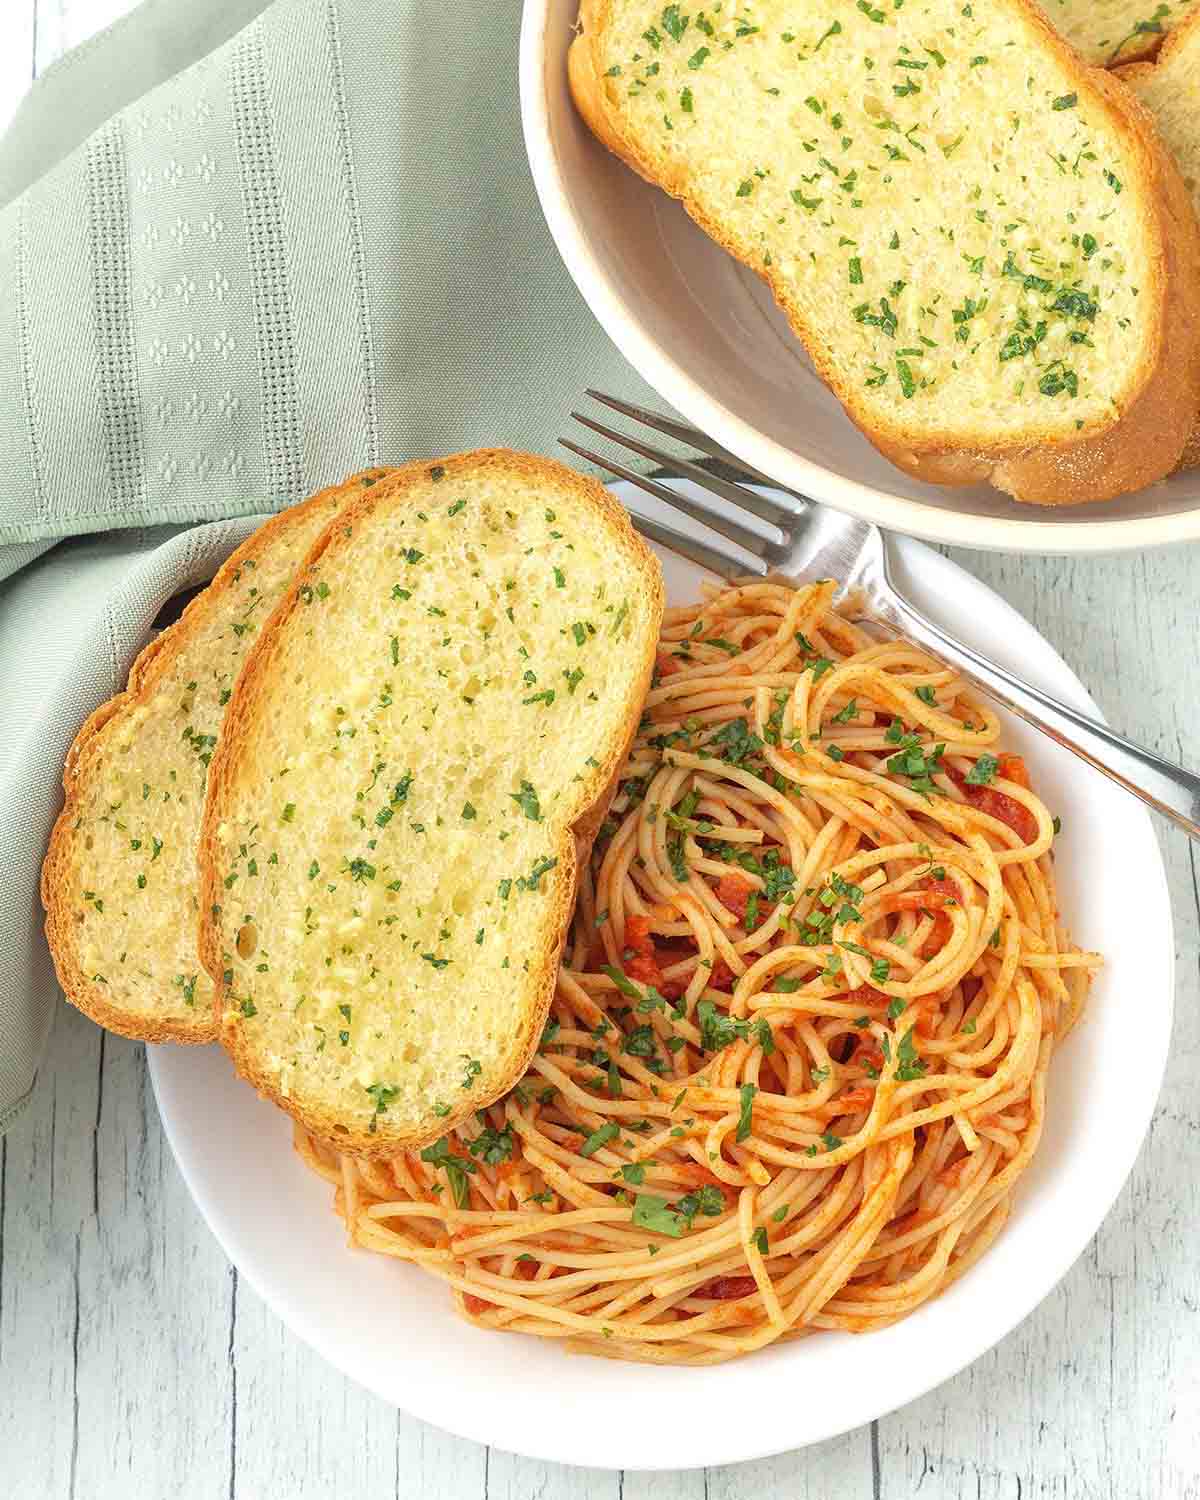 A plate of spaghetti with sauce, two pieces of garlic bread sit on the left side of the plate.